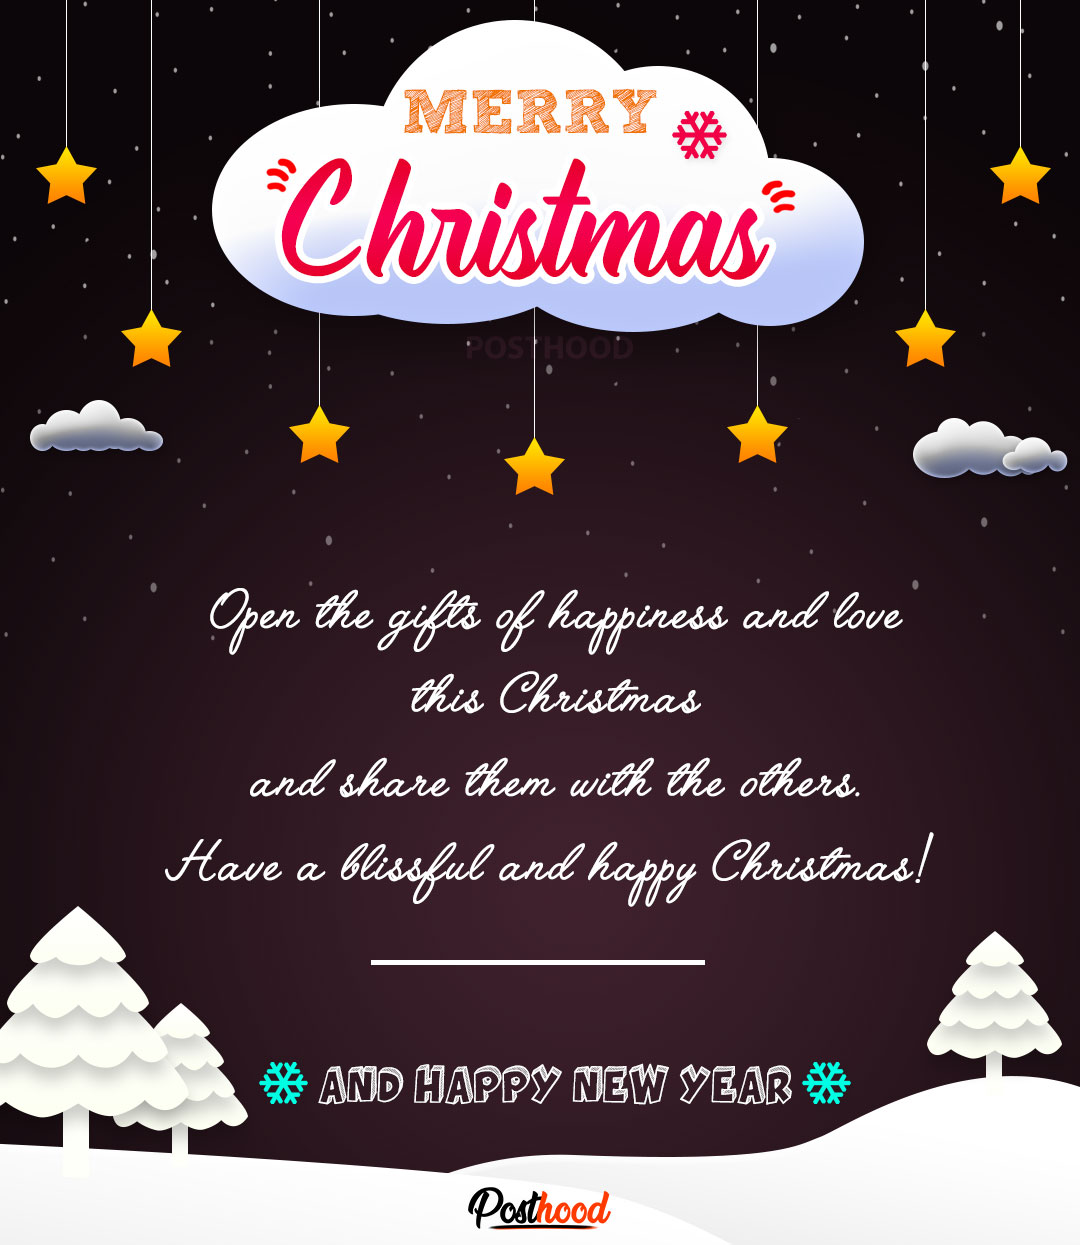 Find 25 cute Christmas messages for your family and friends. Send your love and blessings through these heartwarming Christmas and New Year wishes.